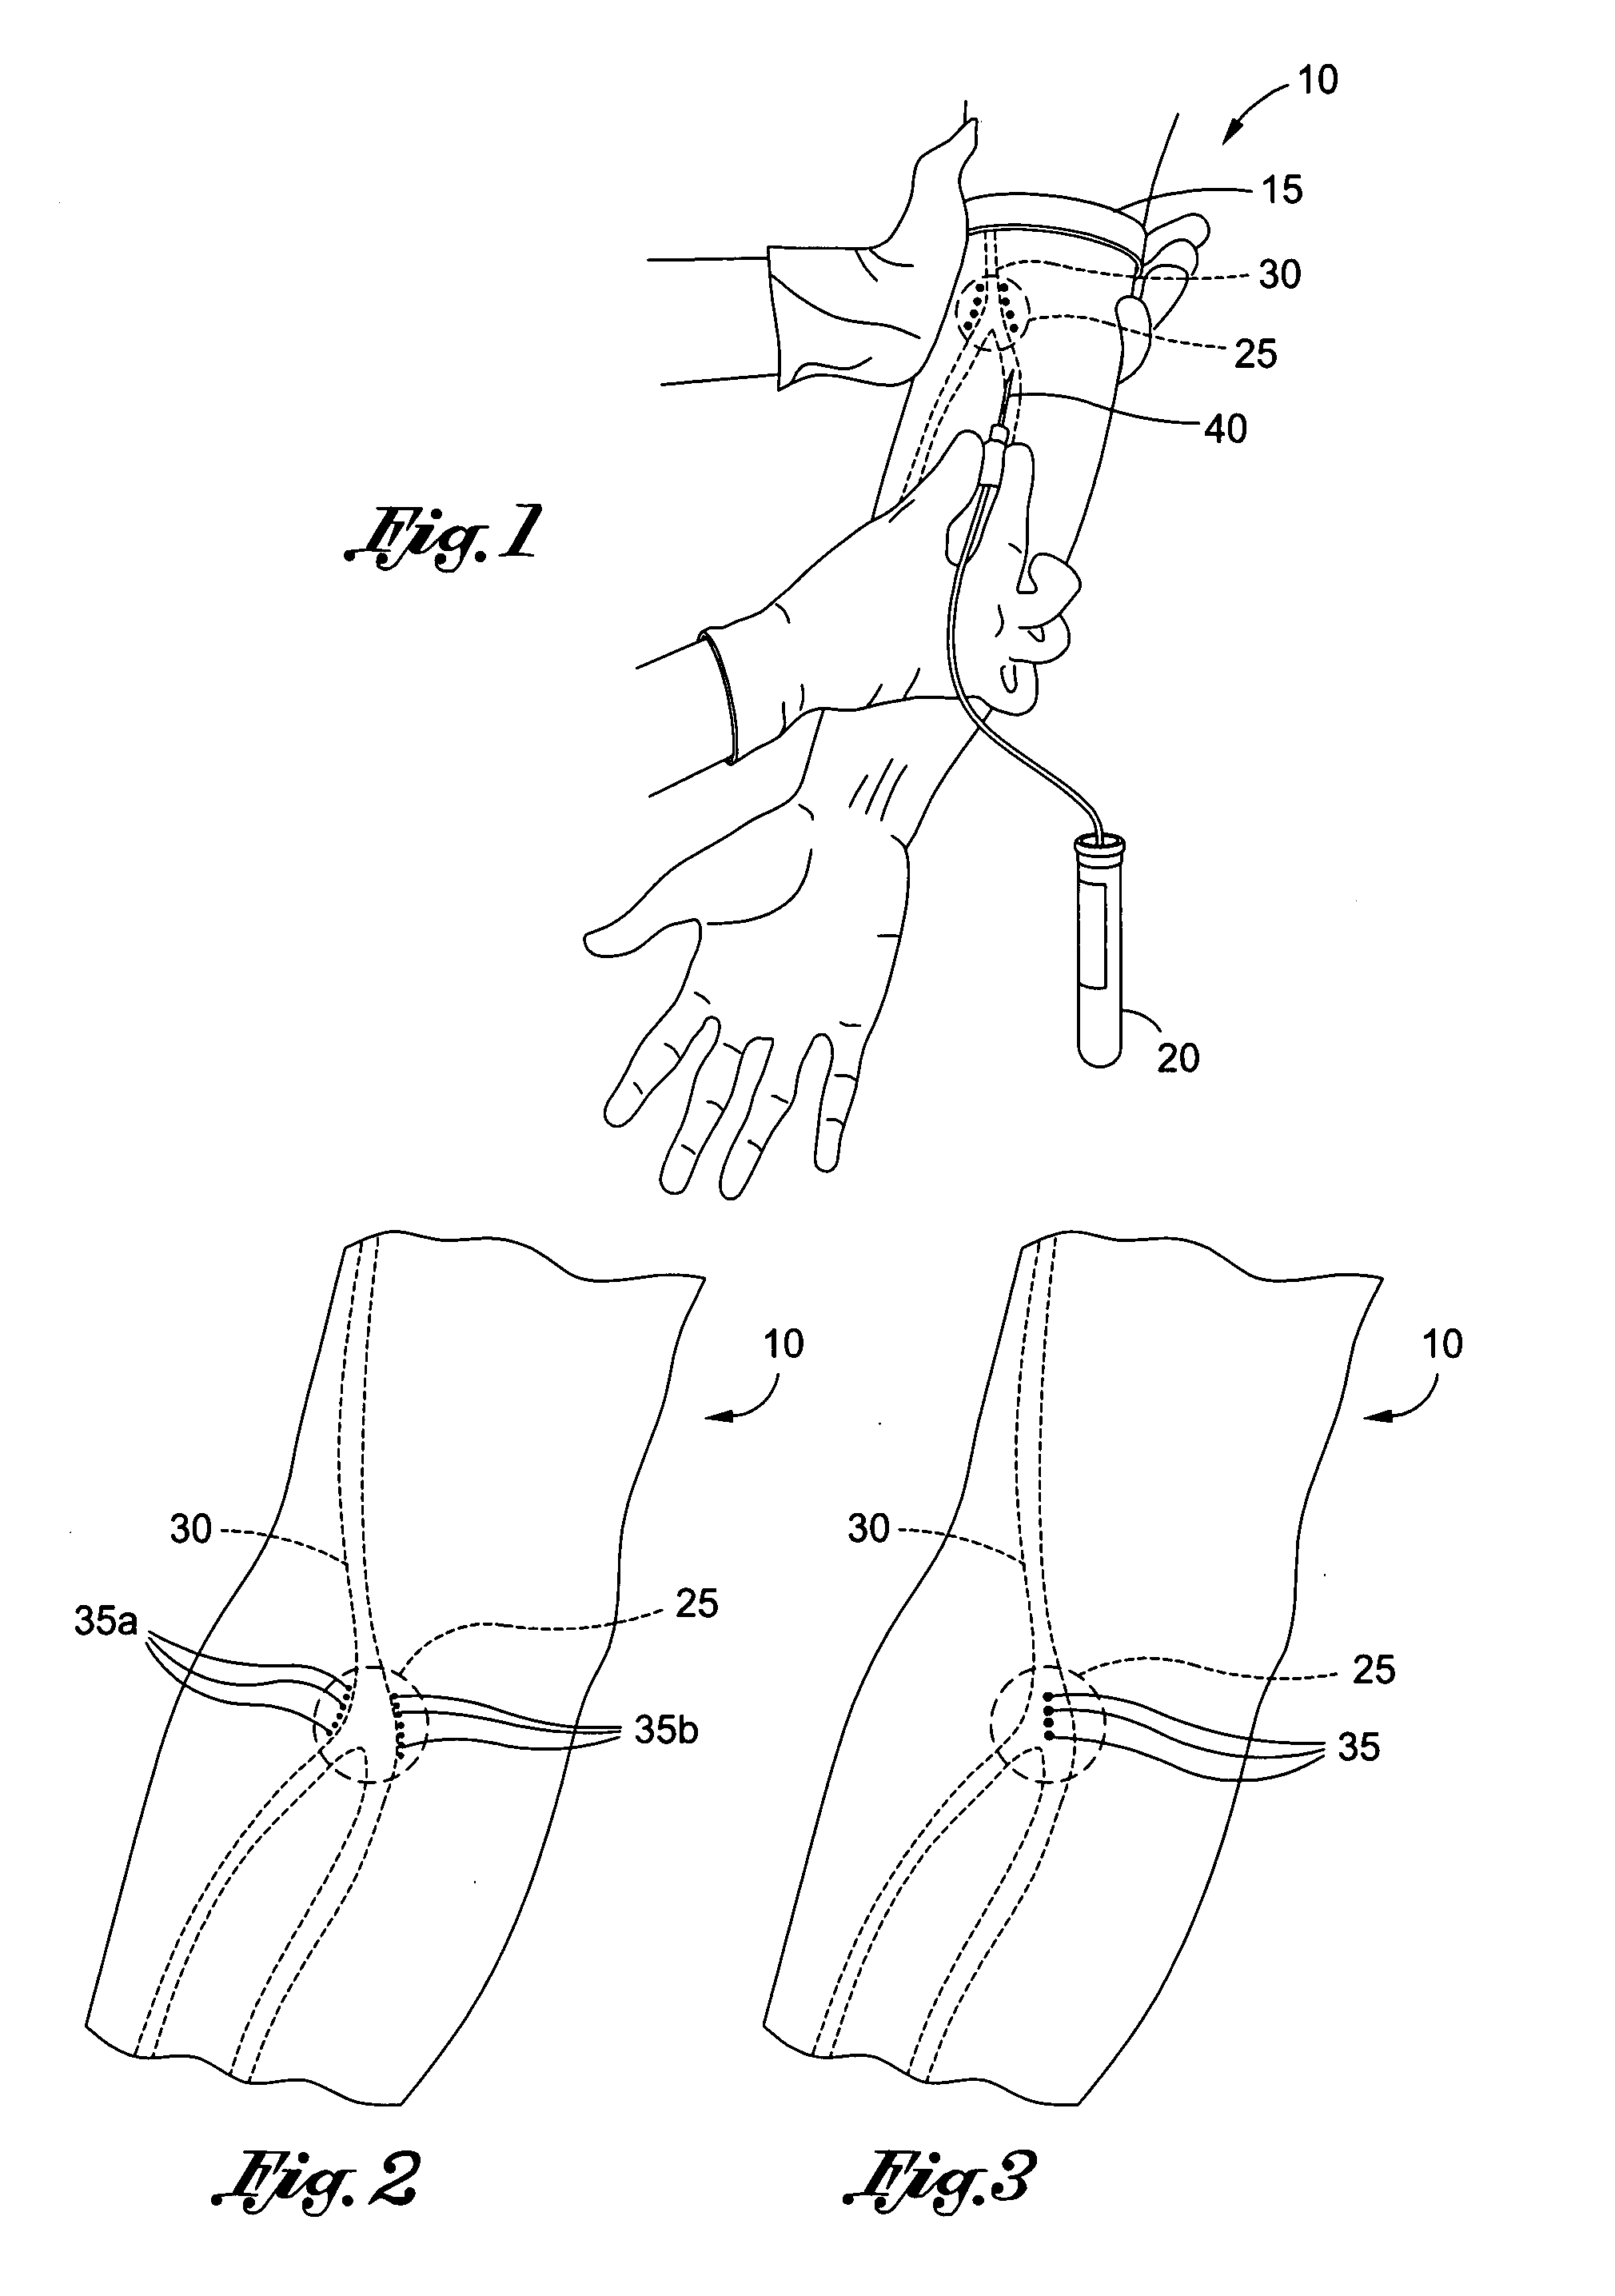 Method of locating vessel puncture access sites via tattoo or permanent marking